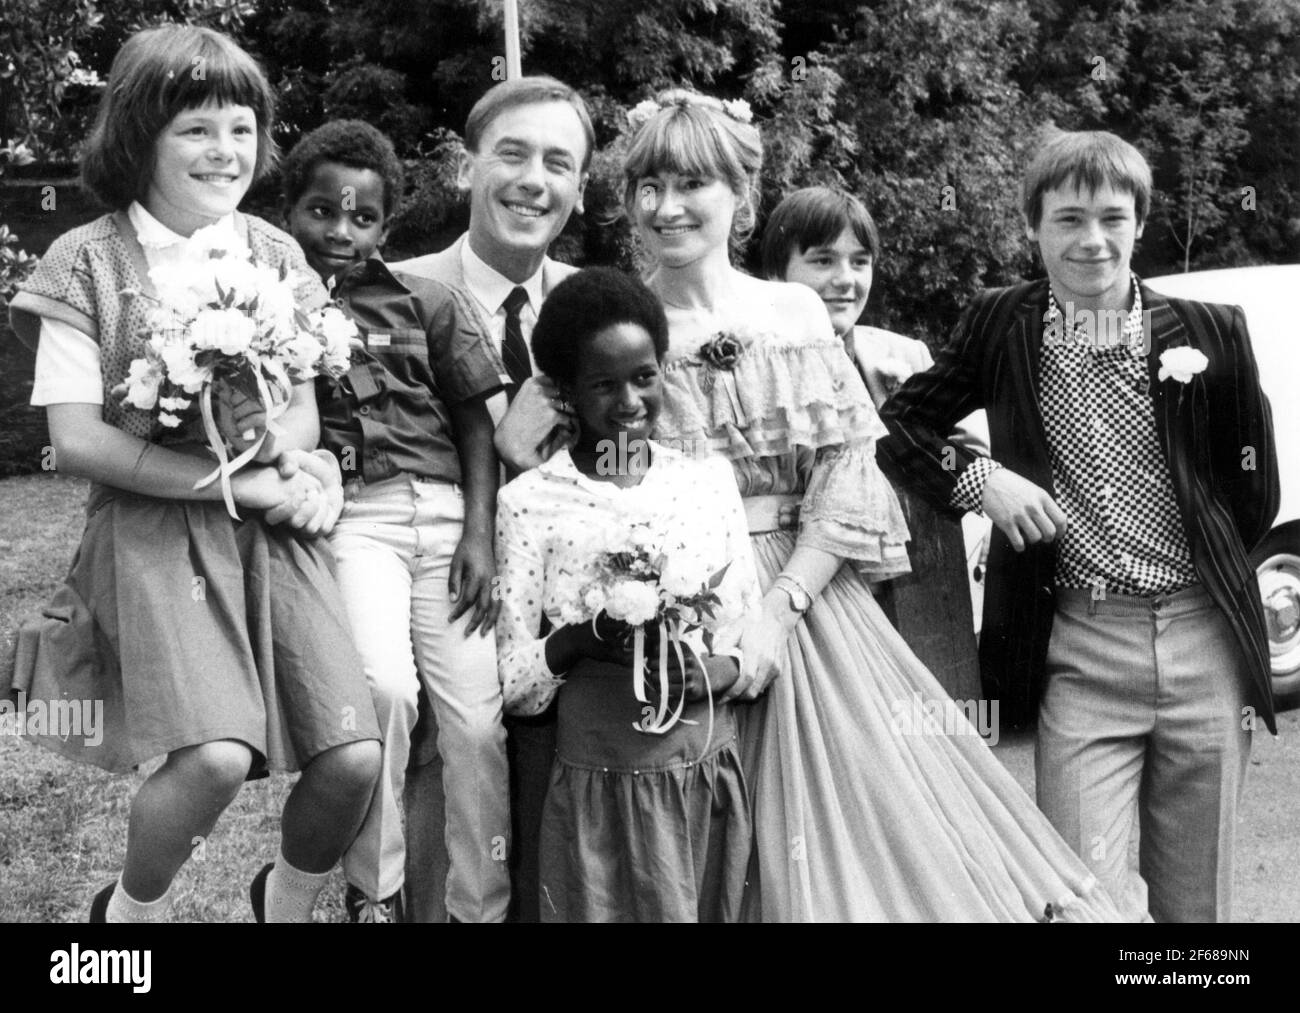 ACTOR CHRISTOPHER TIMOTHY MARRIES ANNIE SWATTON AT CHICHESTER REGISTRY OFFICE. THE COUPLE ARE PICTURED WITH THEIR FAMILY. L TO R. ARE, TABATHA (11) DAVID (7), CHRISTOPHER (14) KATE (9), ANNI, NICHOLAS (15) AND SIMON (16). 1980'S PIC MIKE WALKER, M. AND Y. PORTSMOUTH. Stock Photo